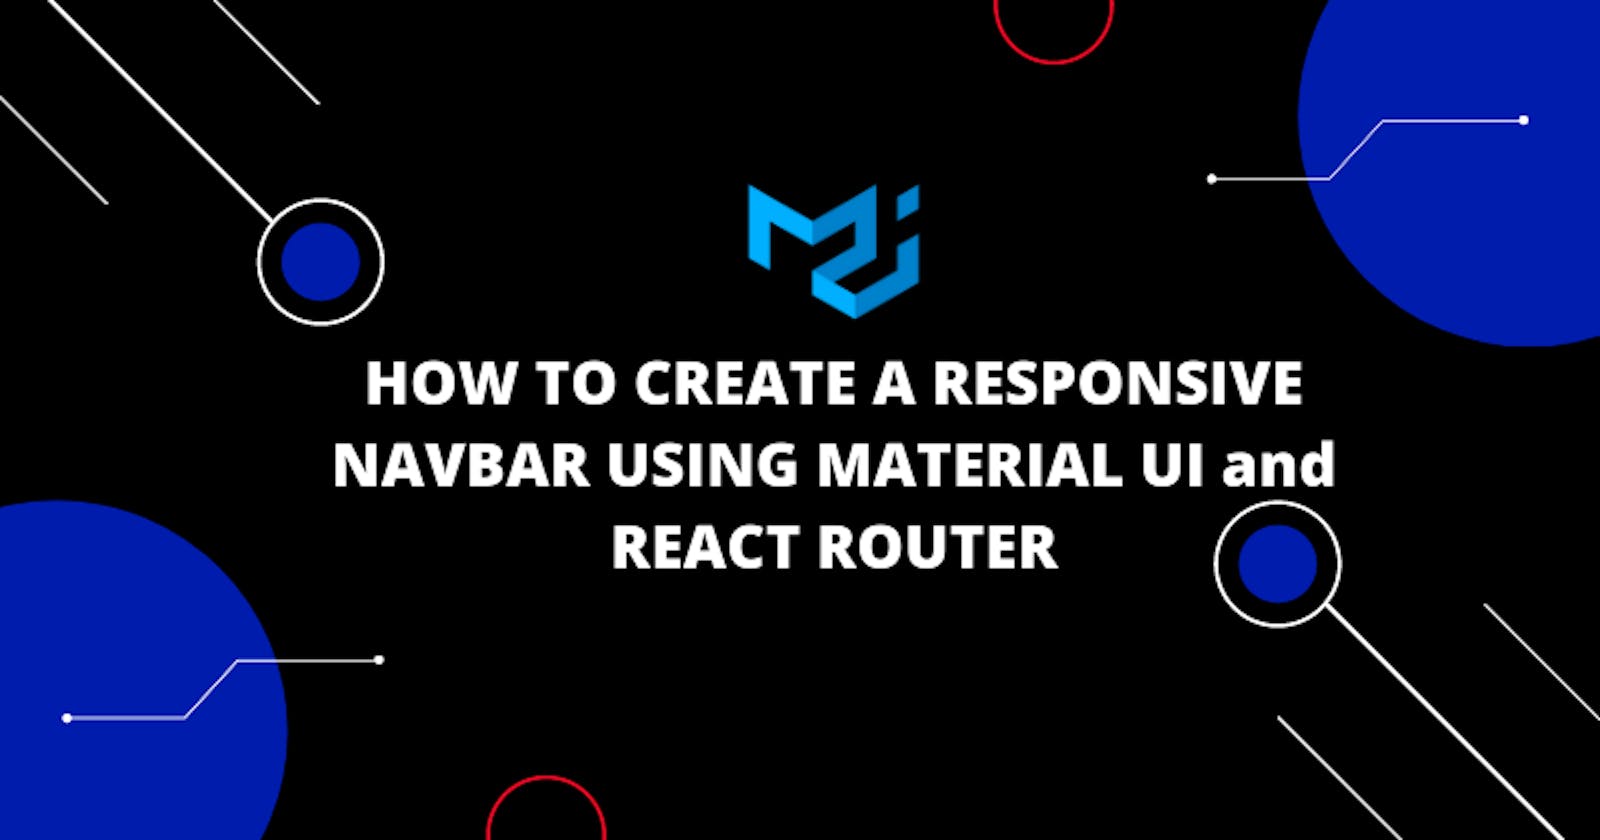 HOW TO CREATE A RESPONSIVE NAVBAR USING MATERIAL UI and REACT ROUTER